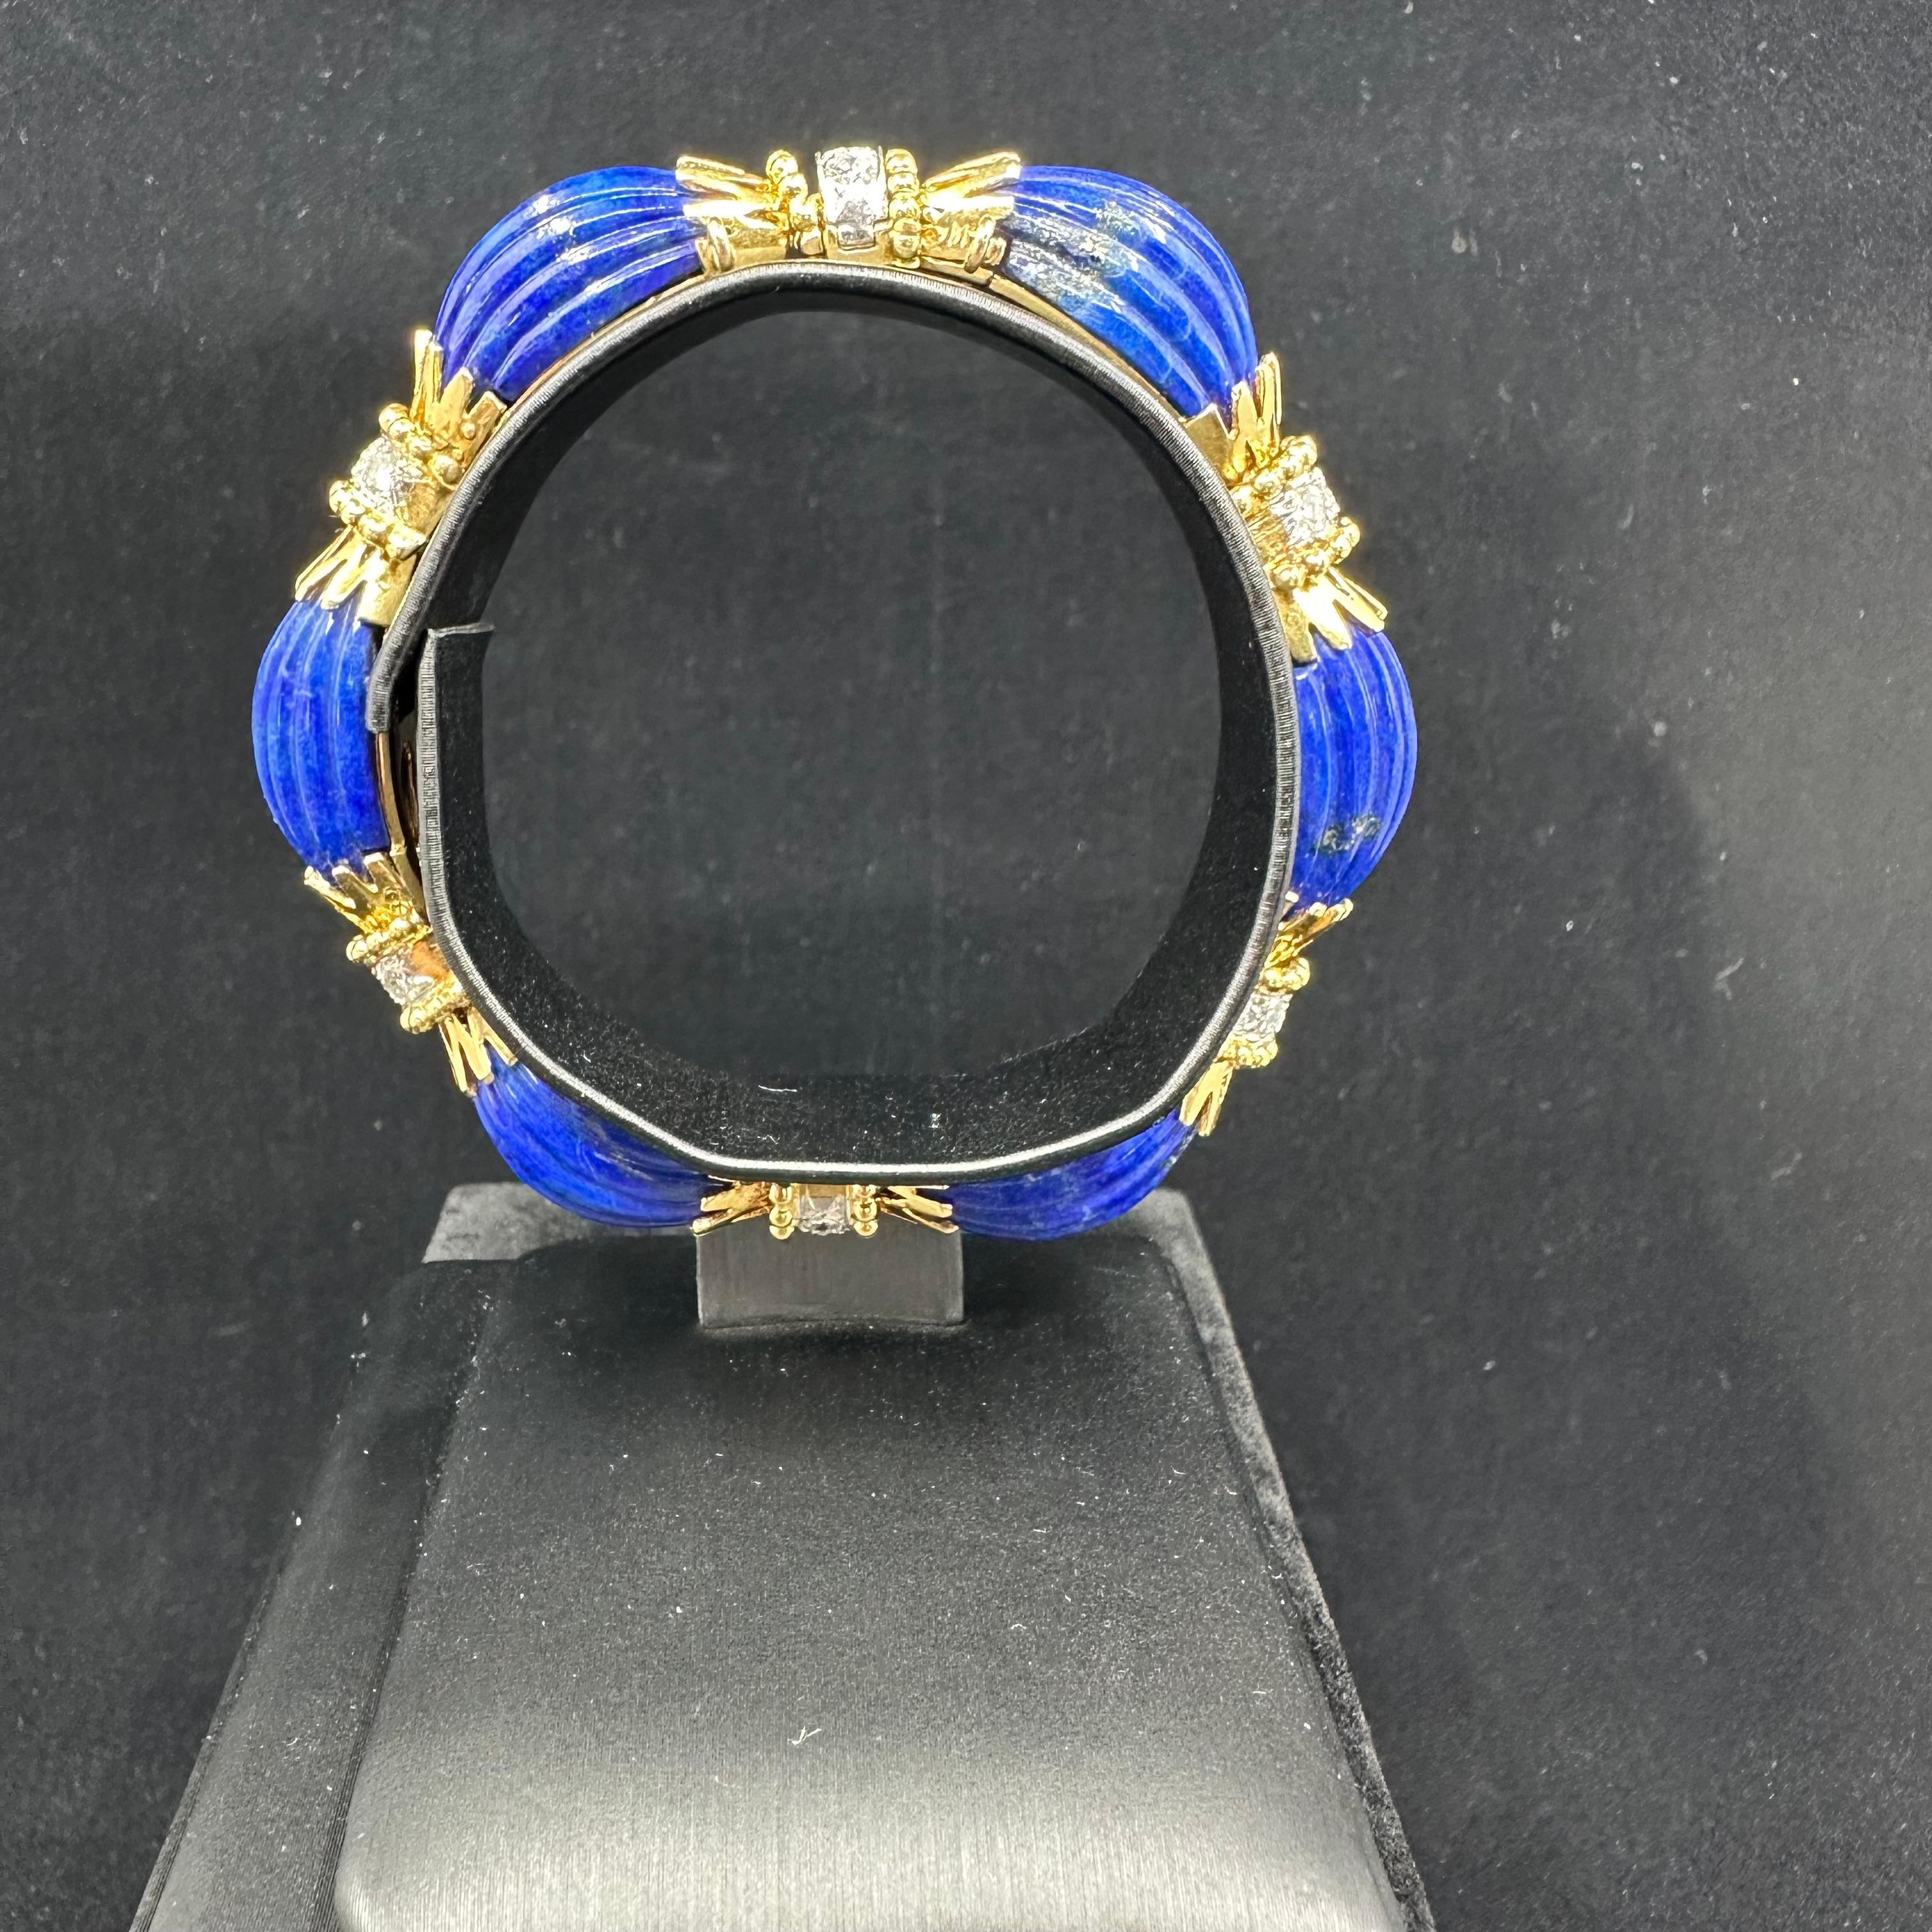 VCA 1970  Blue Lapis Diamond Bracelet, six articulating Fluted Carved Lapis Lazuli sections plus 3 diamonds between each section.
Total of 1.90 cts of fine white diamonds,
French Hallmarked vca numbers and stapes of the vca workshop.
Medium wrist